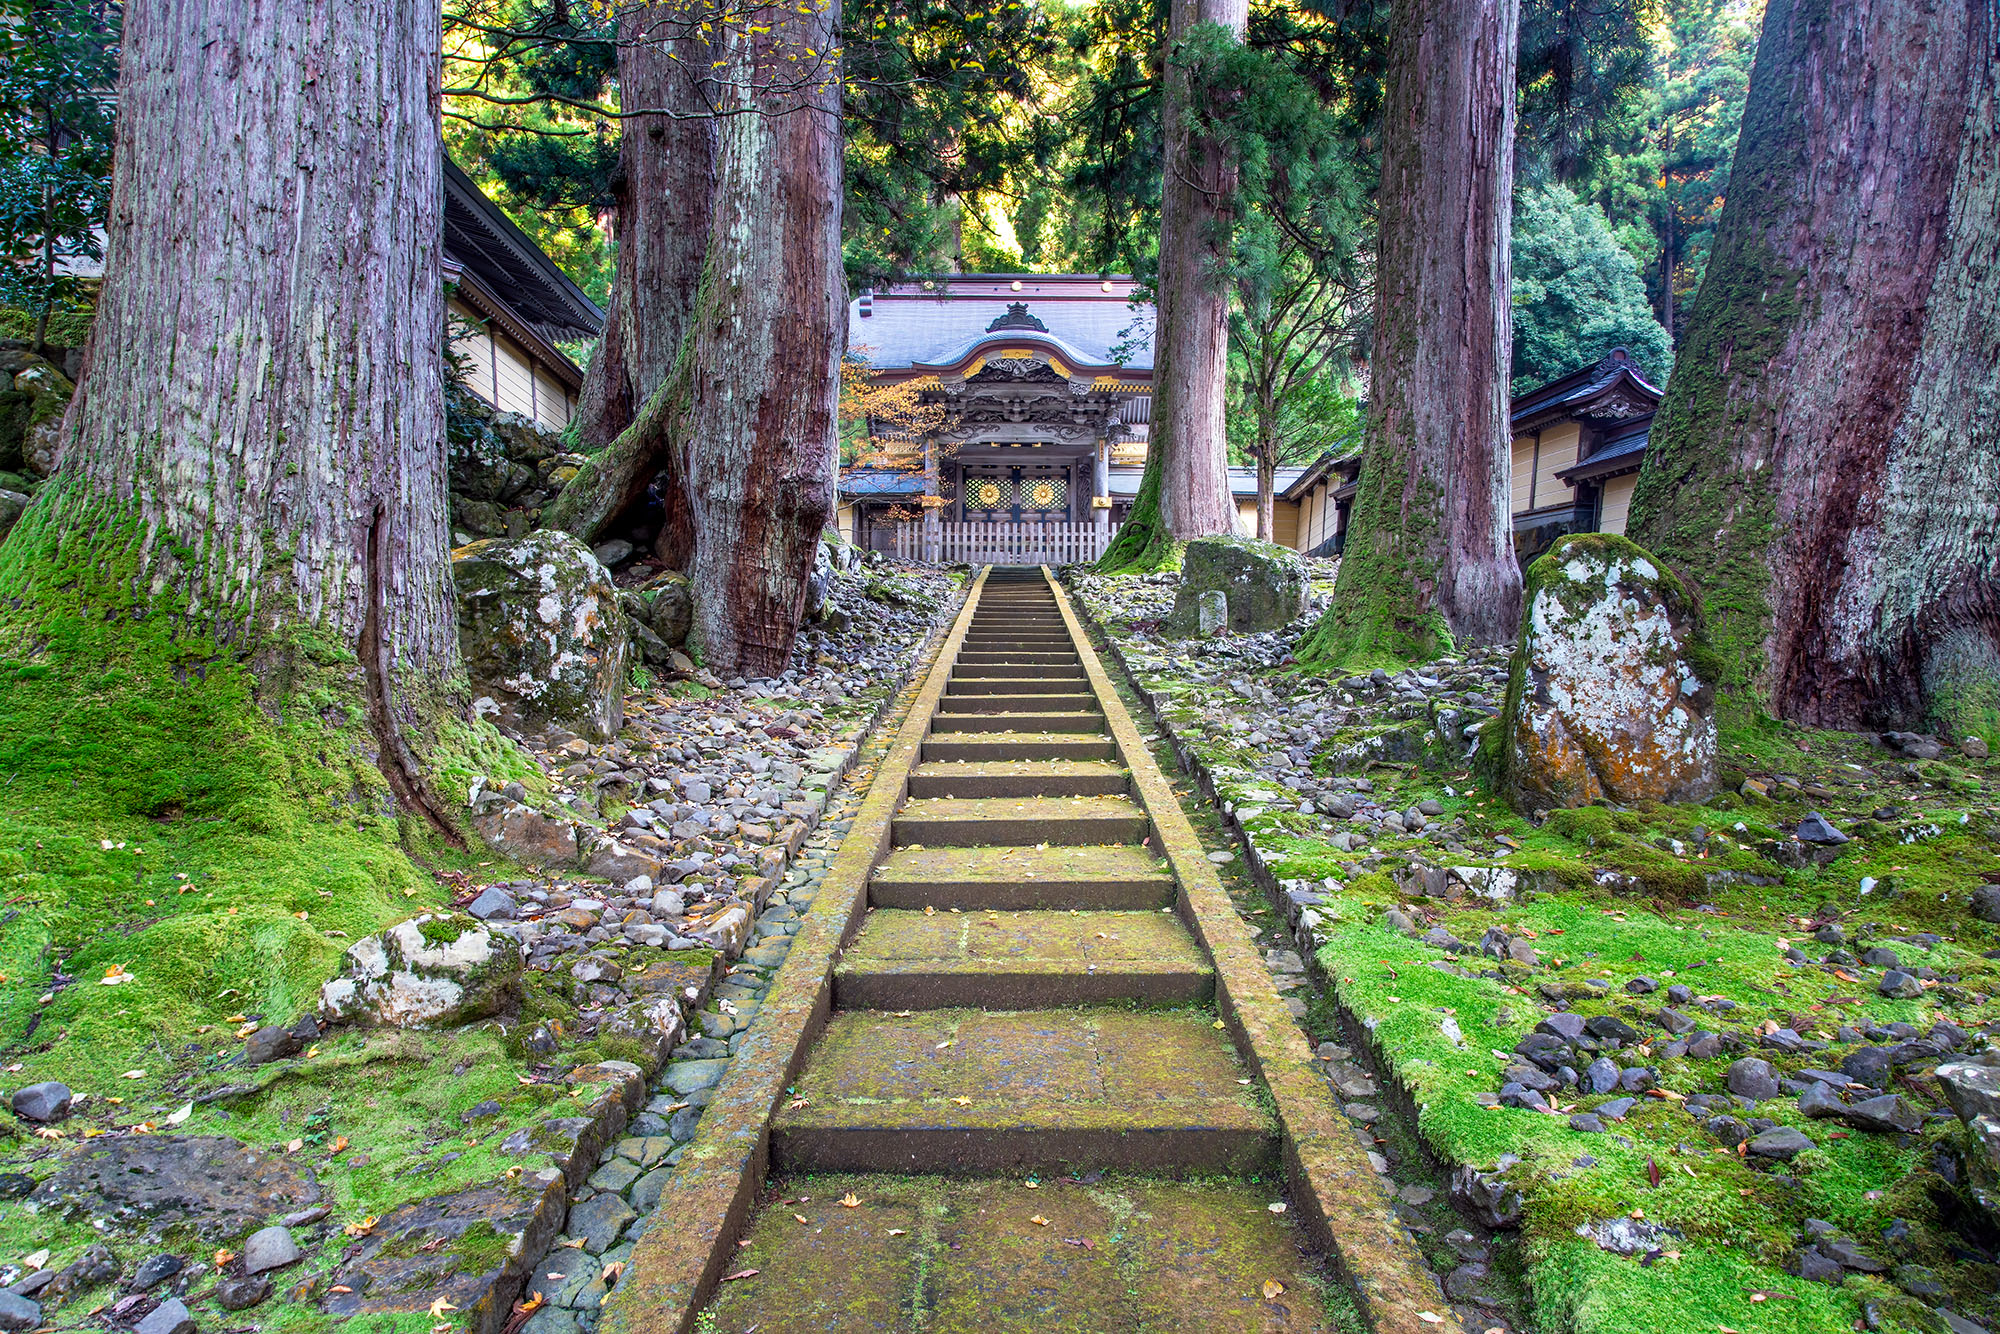 These age-worn stairs, nestled in the sacred Eiheji Temple area, beckon with a timeless charm. As they ascend, flanked by towering...